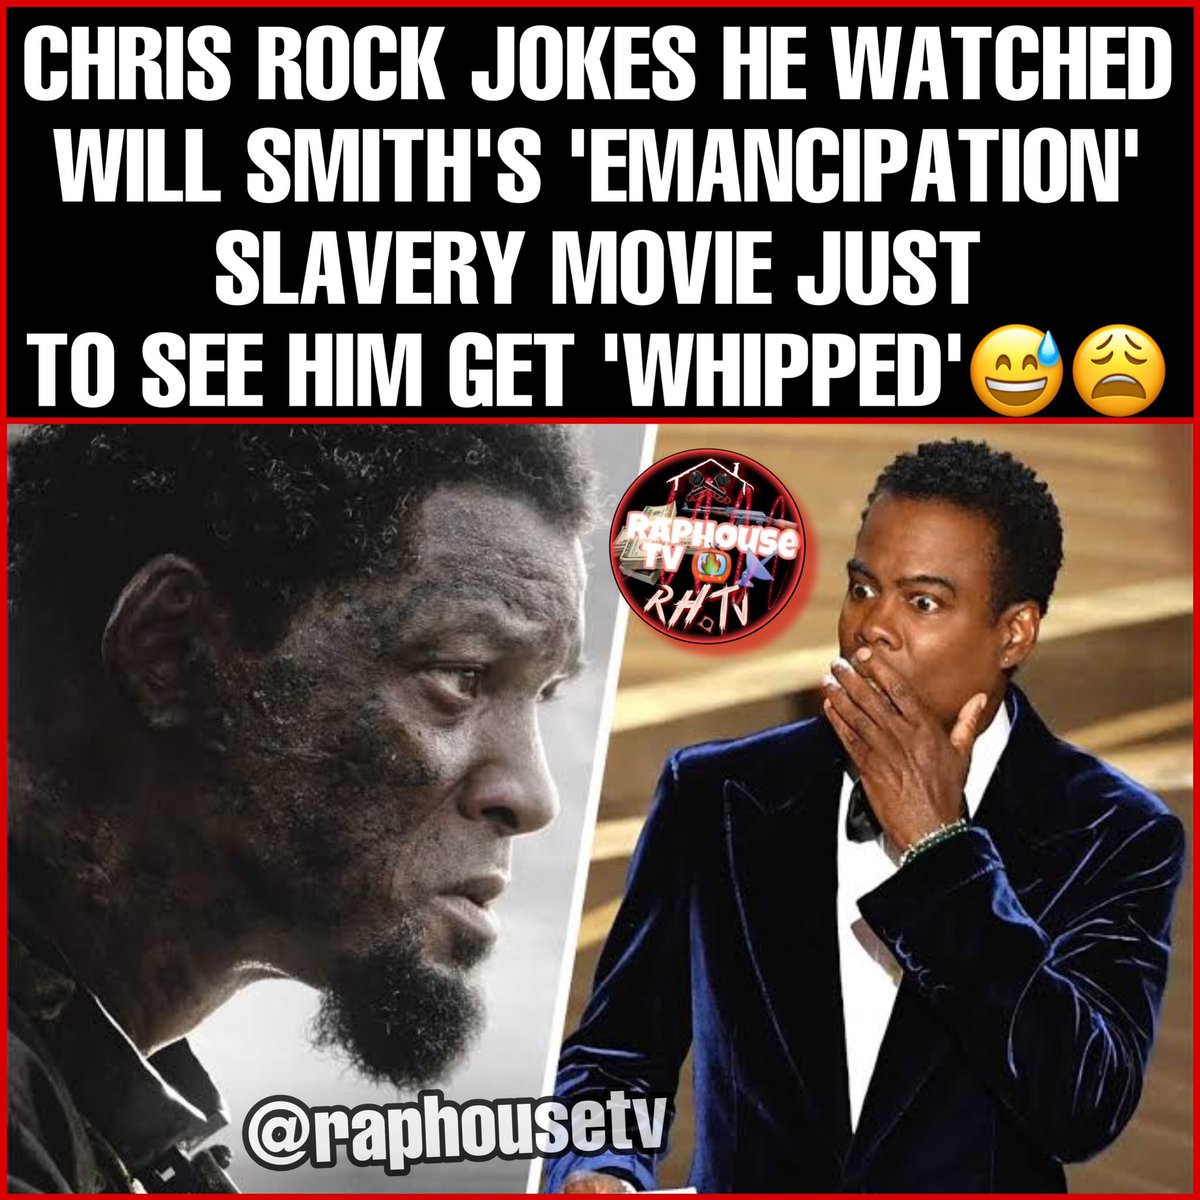 Chris Rock Jokes He Watched Will Smith's ‘Emancipation' Slavery Movie Just To See Him Get 'Whipped'😅😩